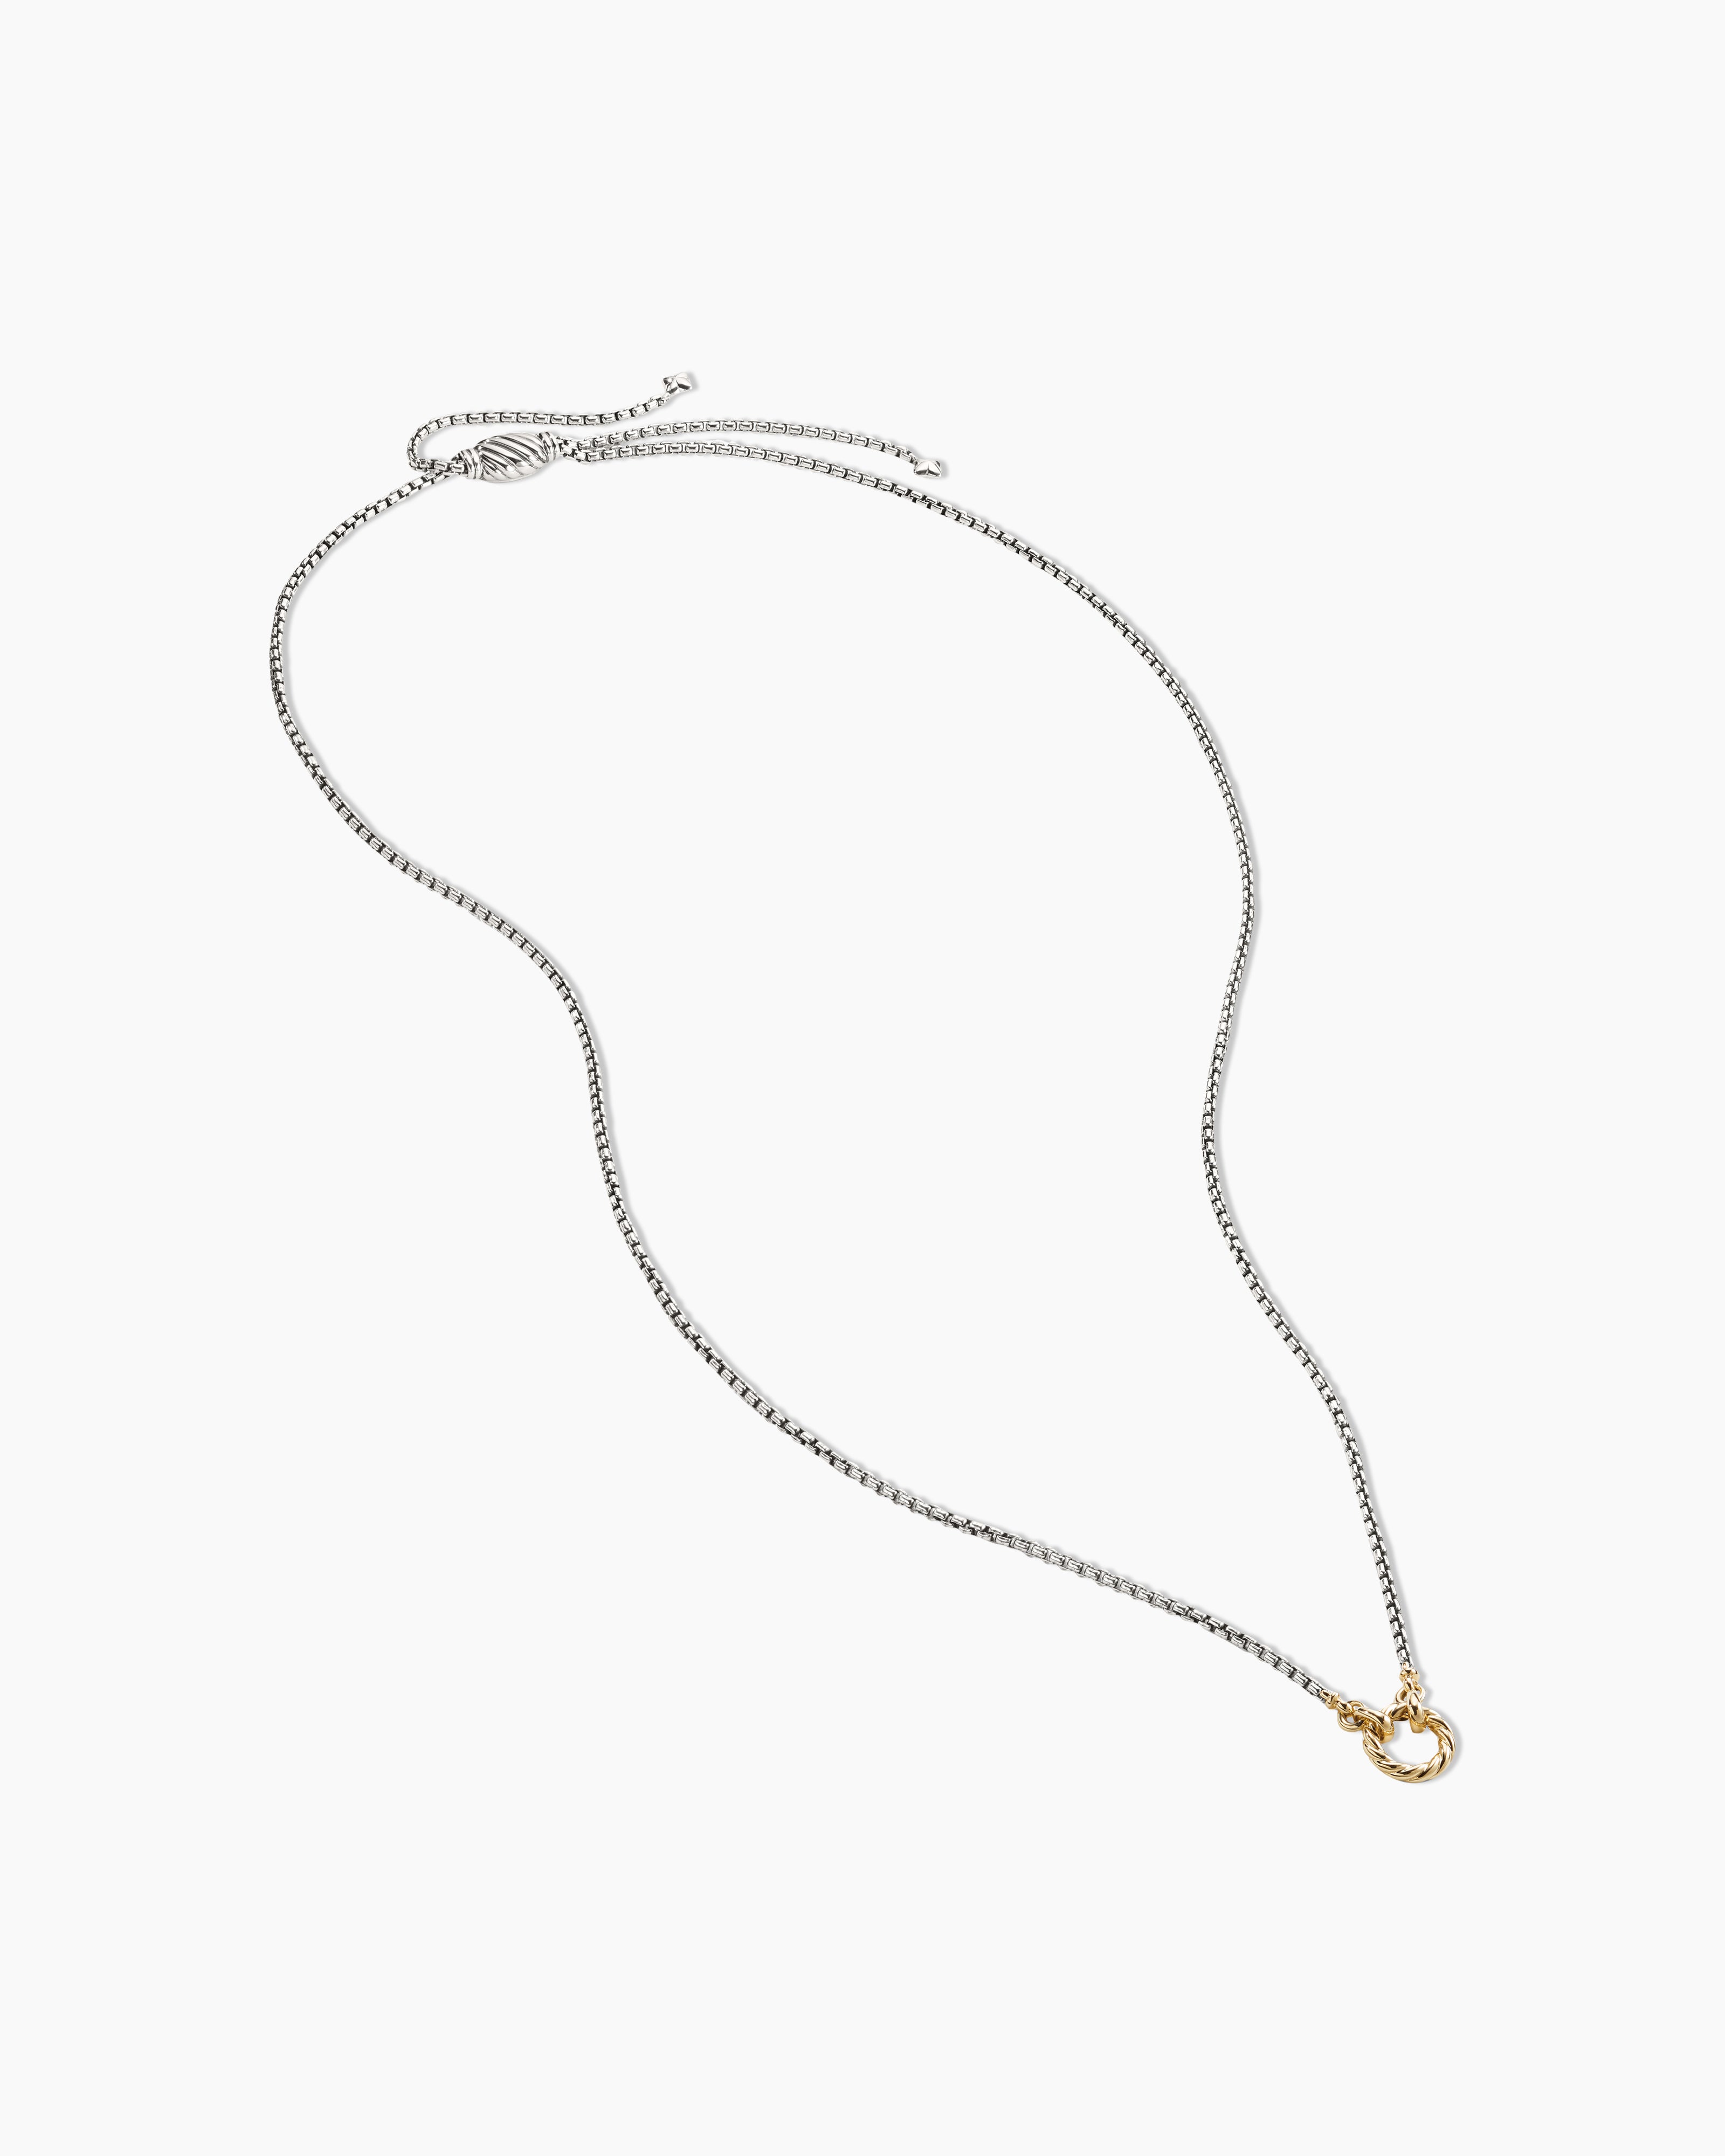 David Yurman Chain Necklace Small Box with Gold 2.7mm 18